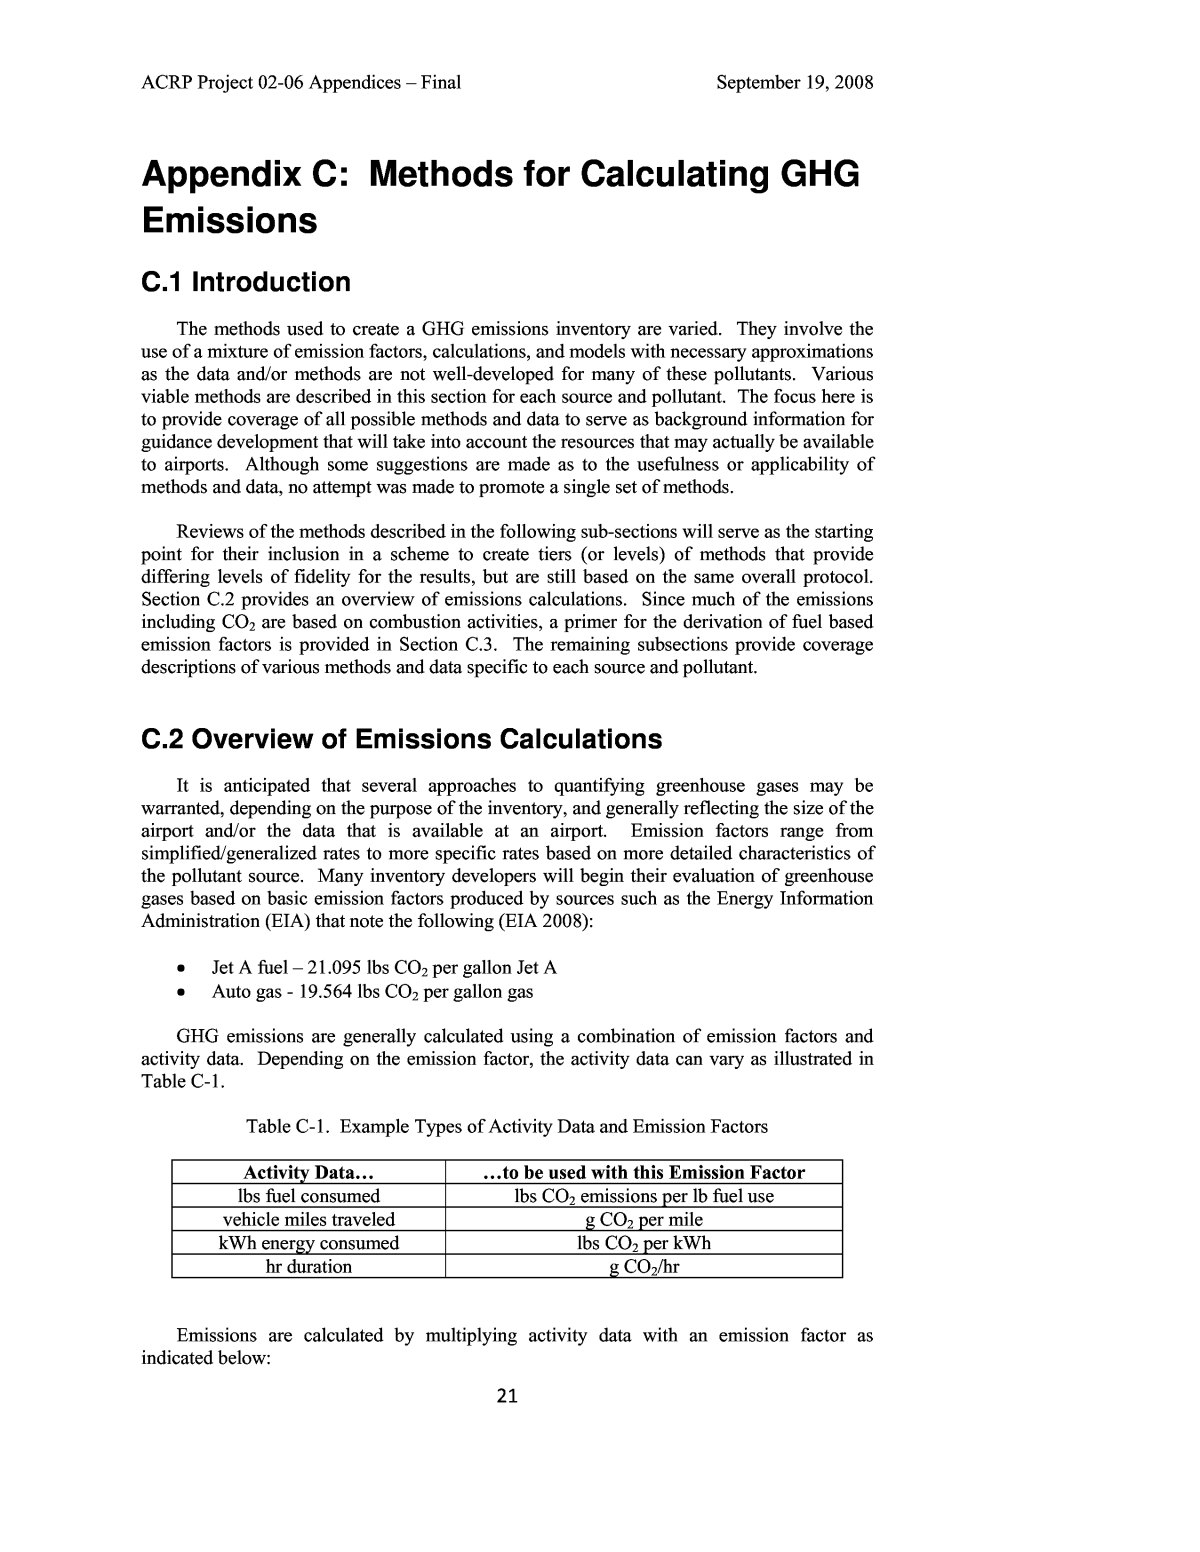 Calculating and Reporting Greenhouse Gas Emissions: A Primer on the GHG  Protocol